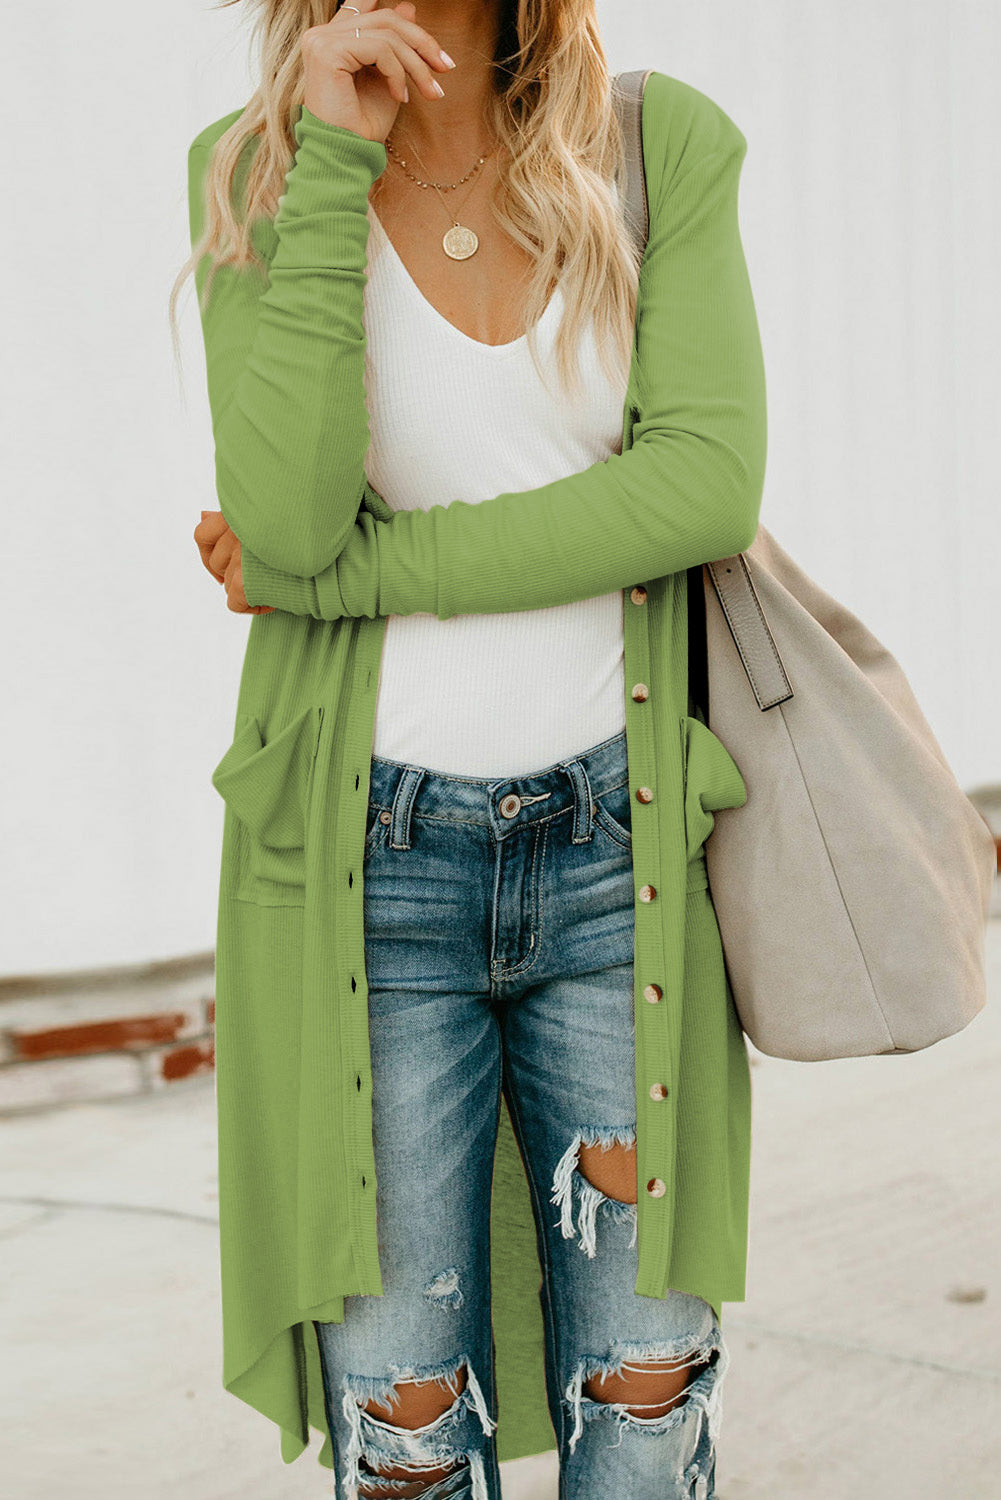 V-Neck Long Sleeve Cardigan with Pocket - Green / S - Women’s Clothing & Accessories - Shirts & Tops - 20 - 2024